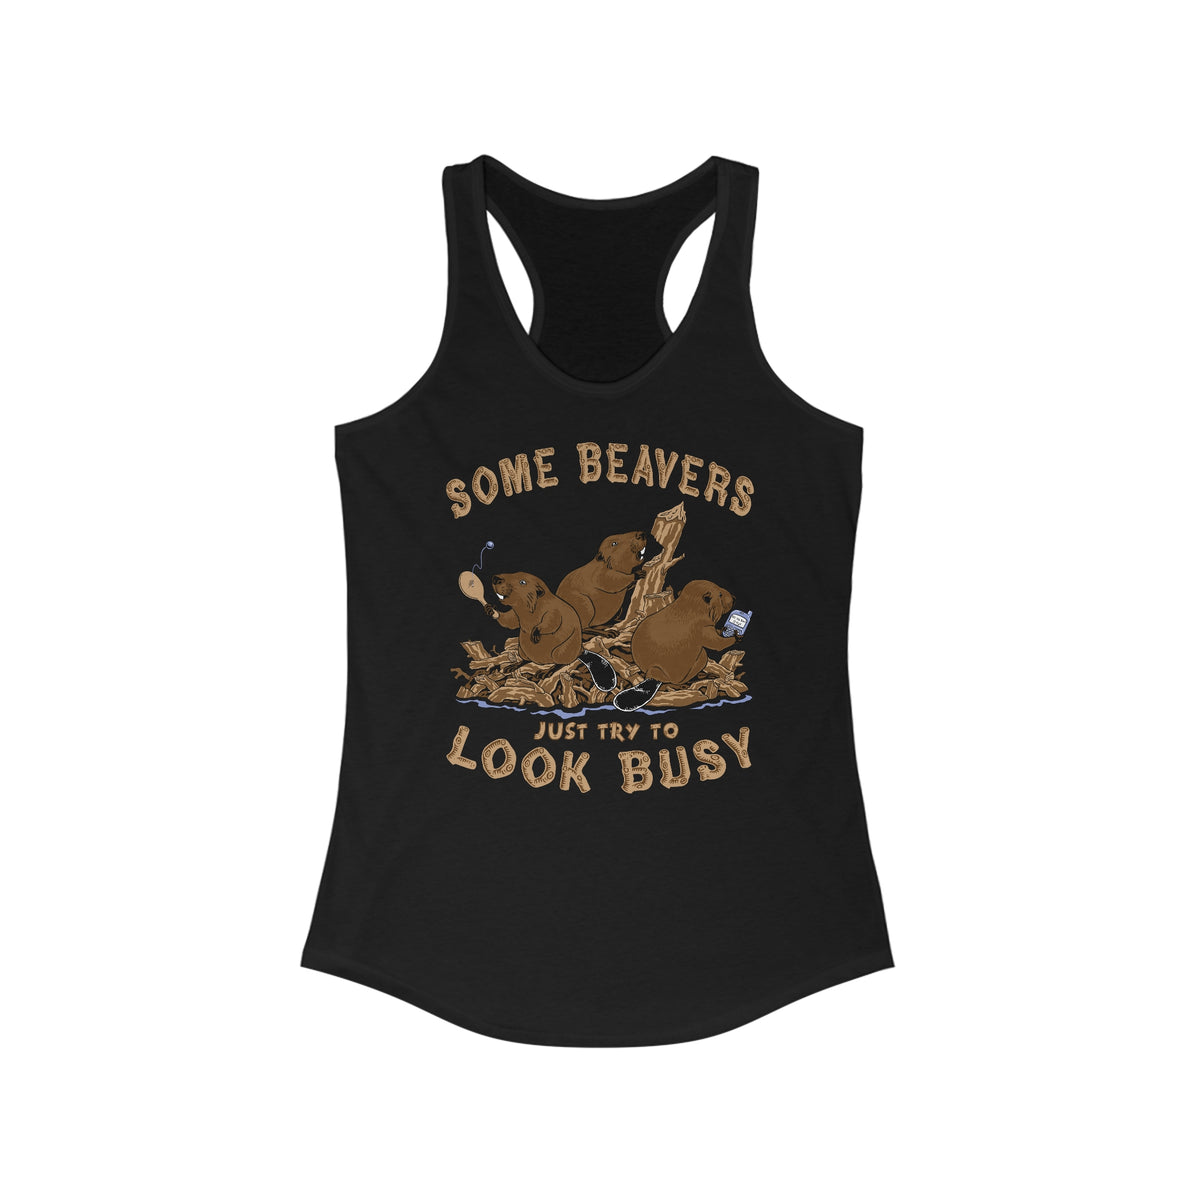 Some Beavers Just Try To Look Busy - Women’s Racerback Tank